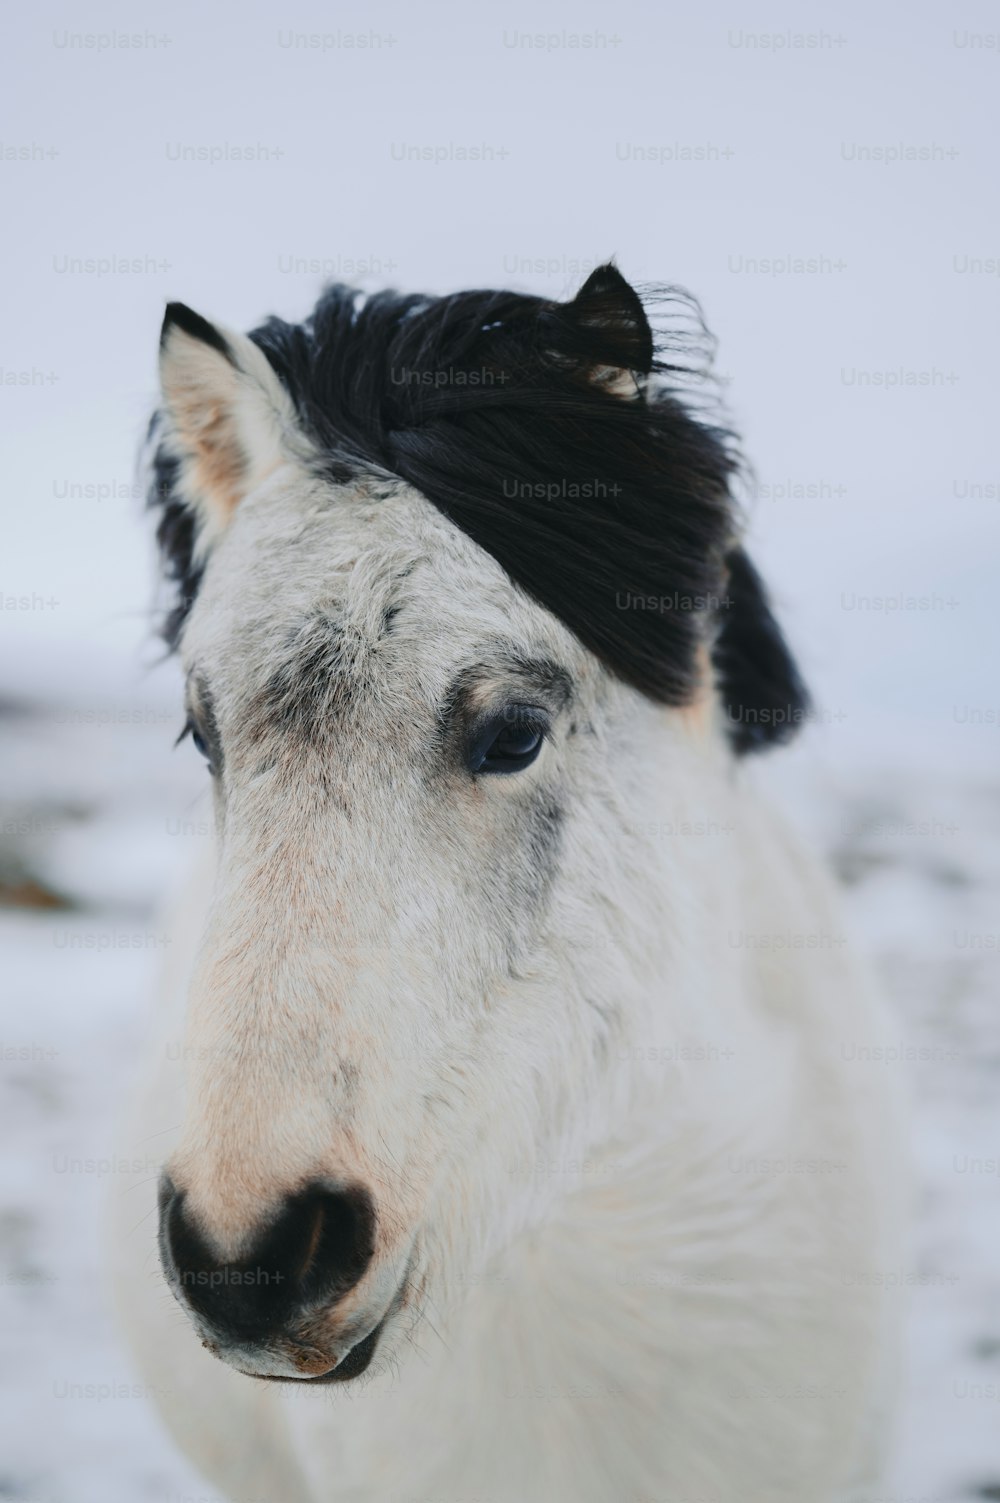 a close up of a white horse with a black mane